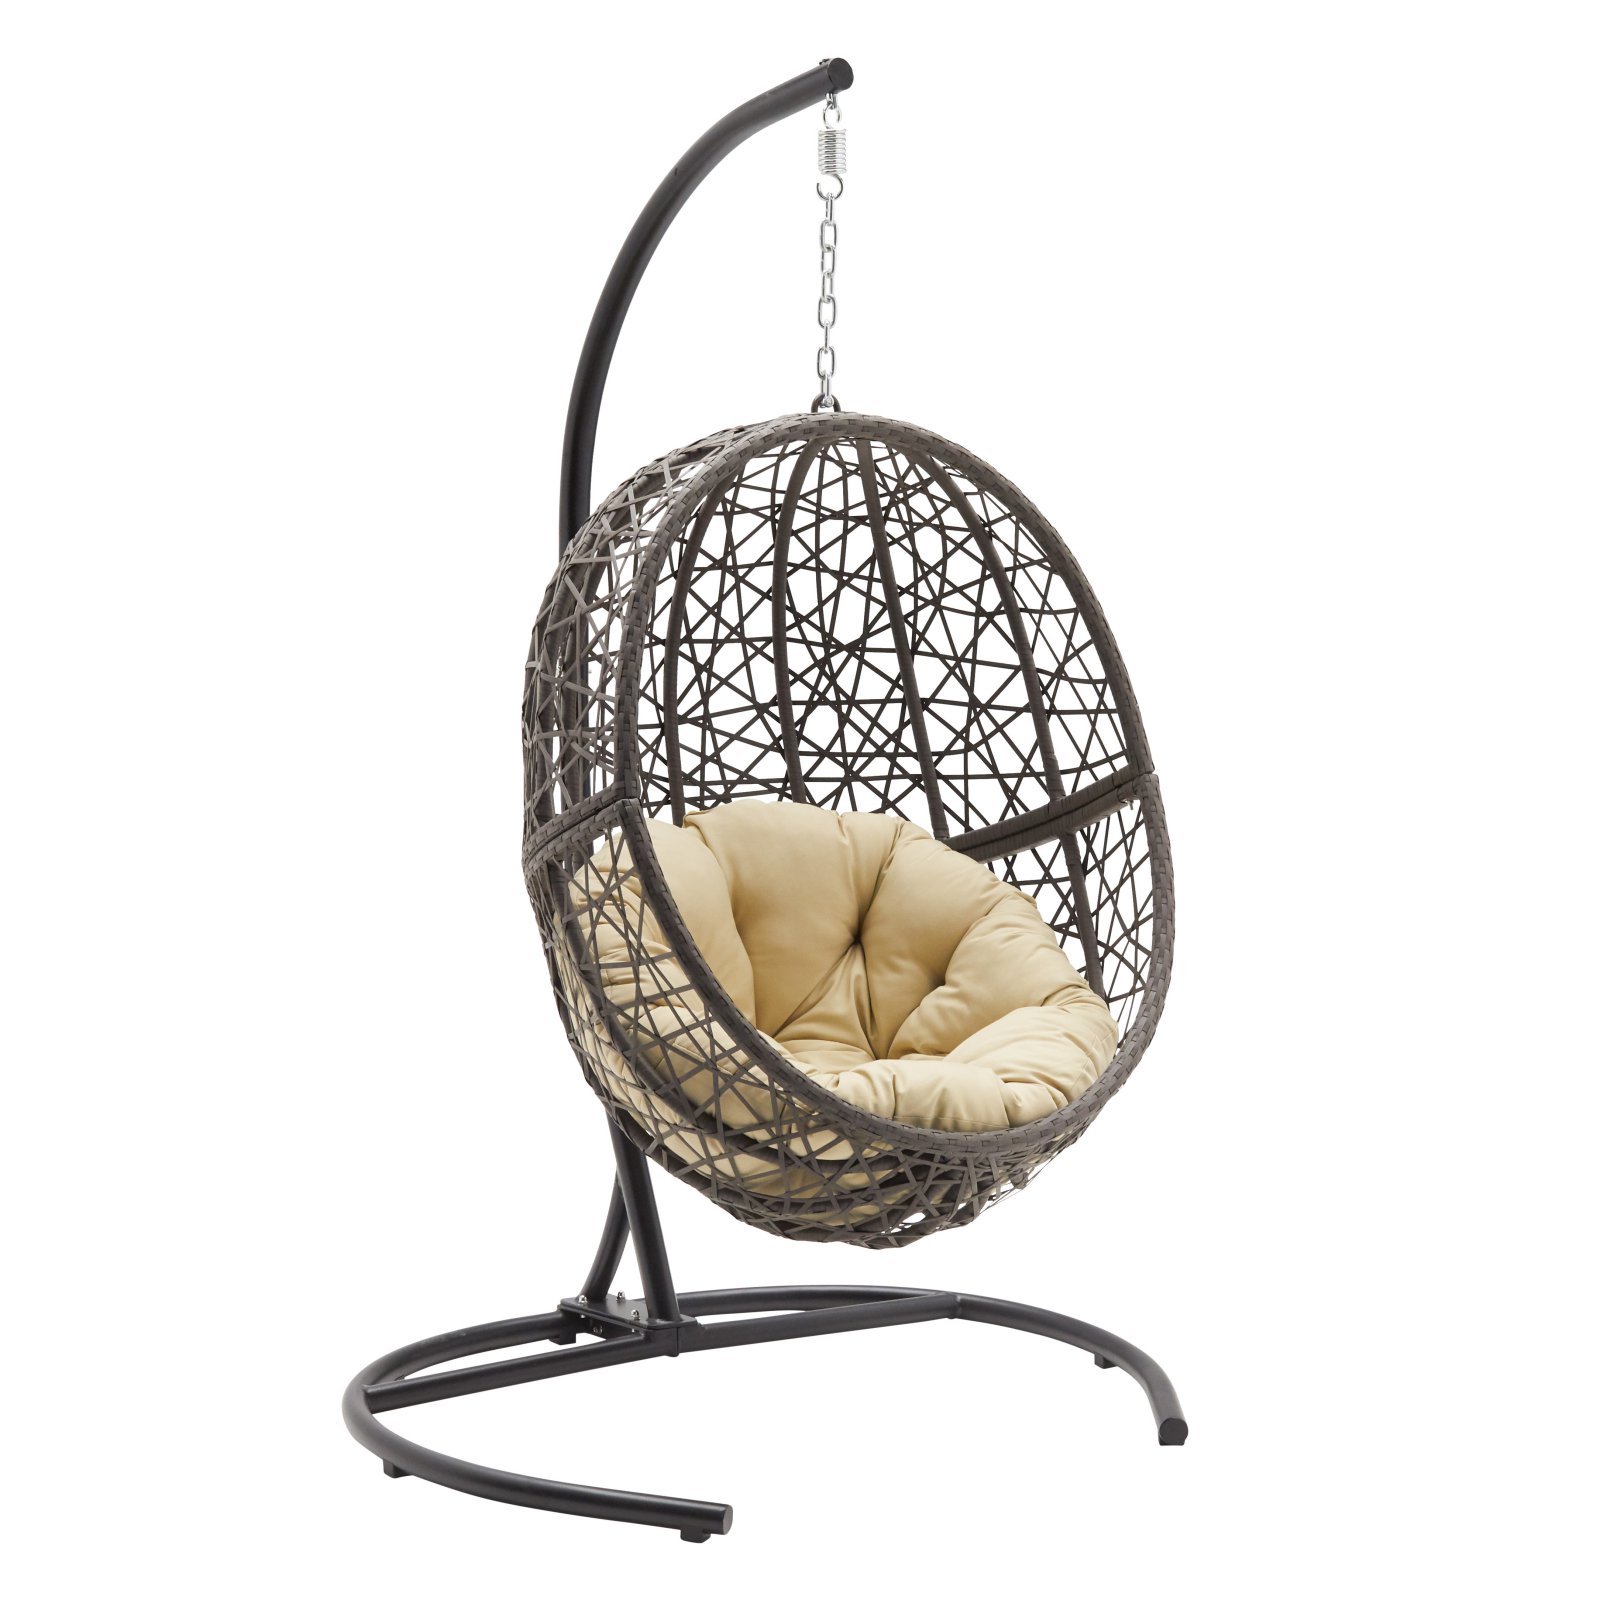 Belham Living Resin Wicker Hanging Egg Chair with Cushion and Stand - image 1 of 11